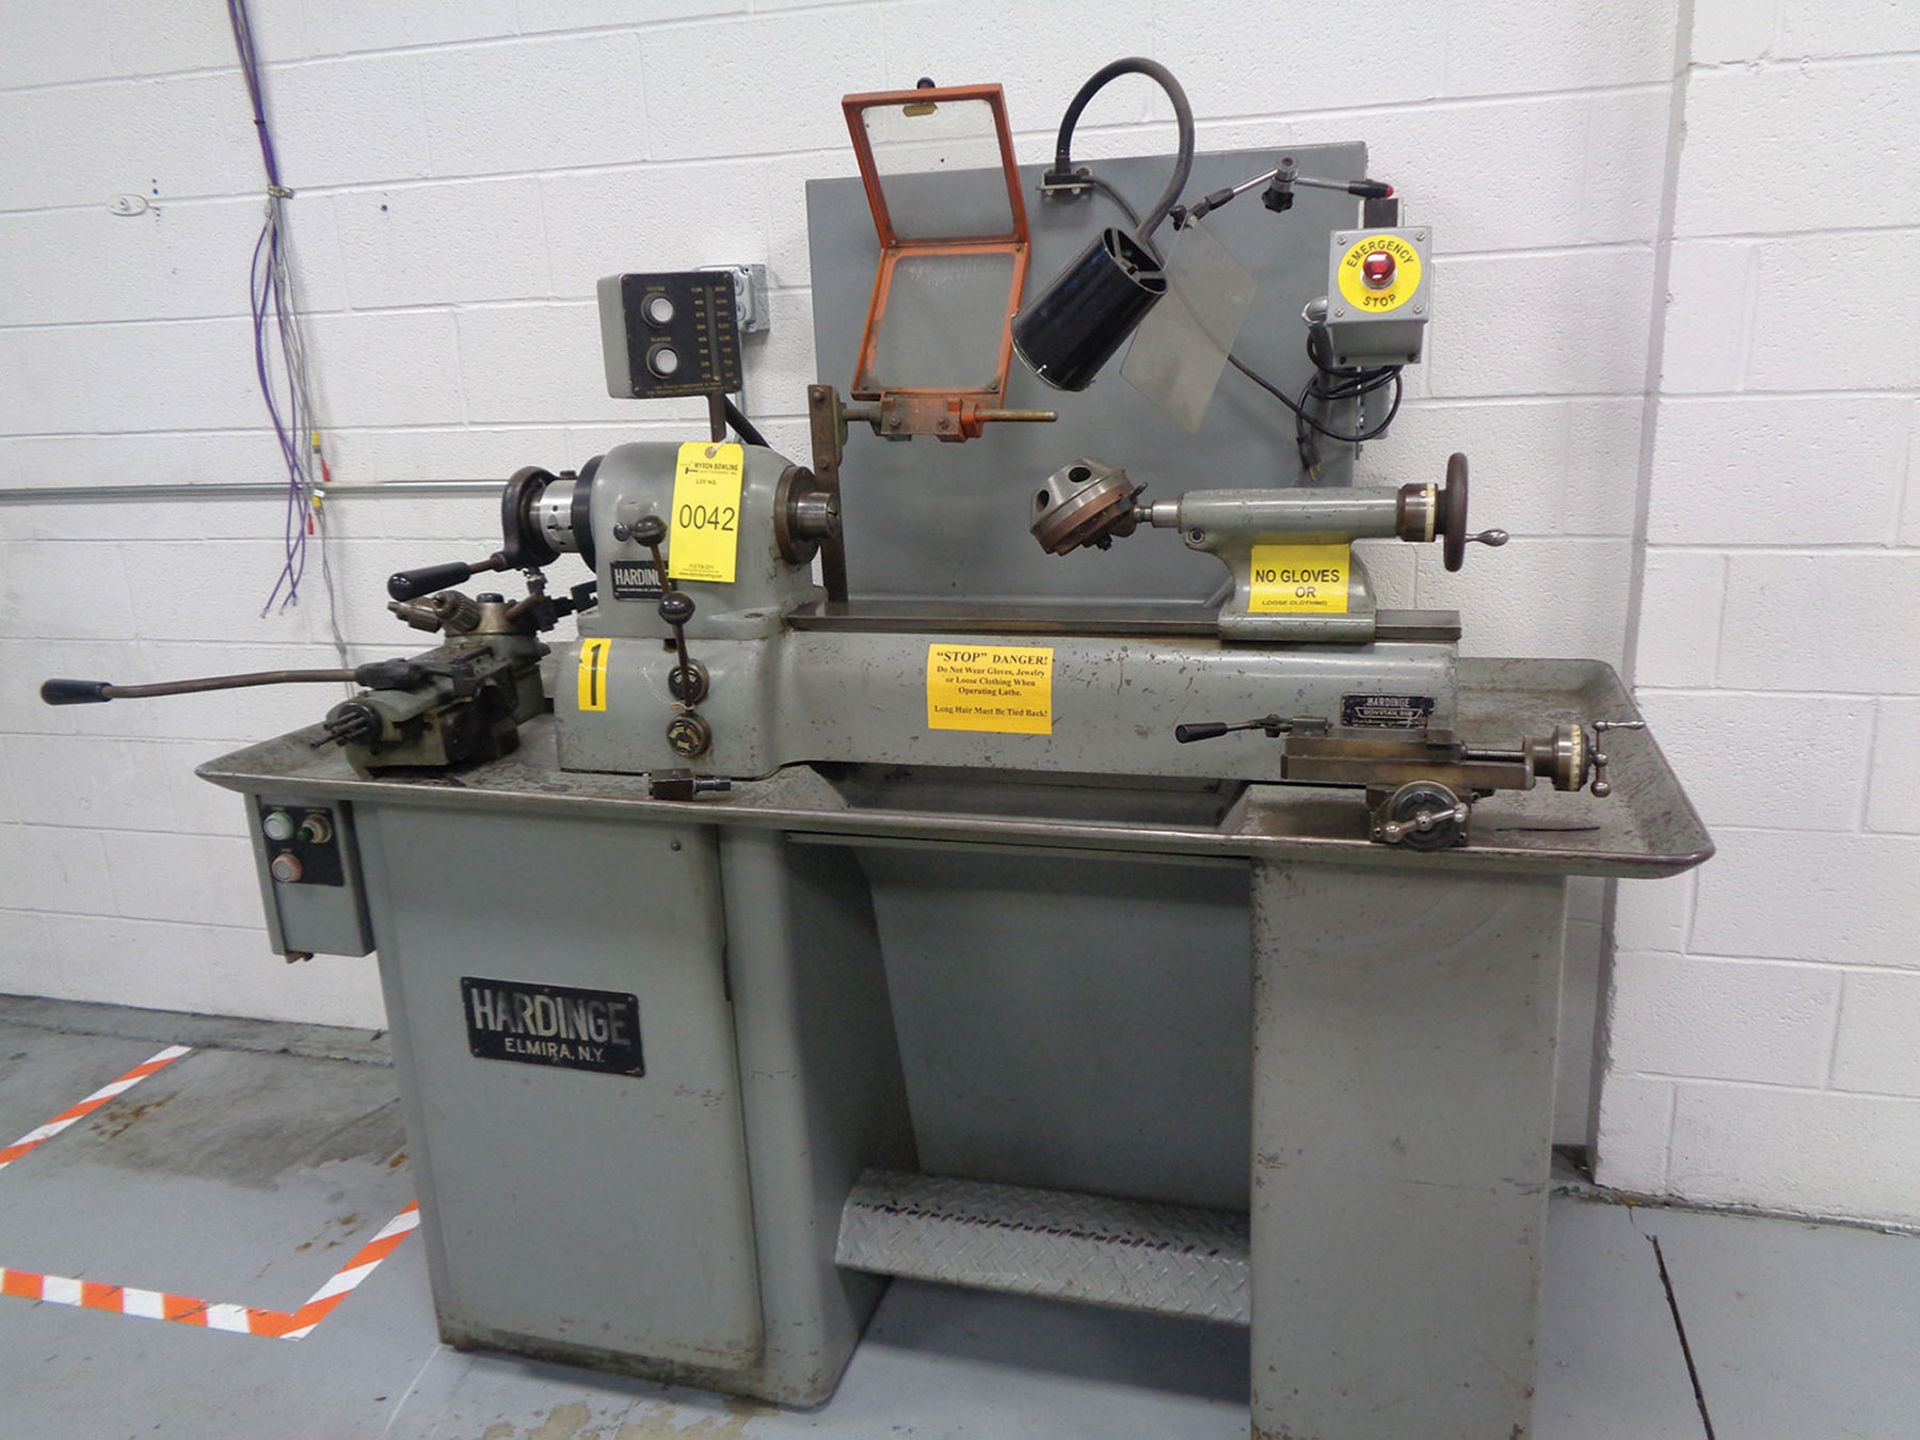 HARDINGE DV-59 LATHE; S/N DV-59-13081, 1 HP, 3 PHASE, 440 VOLTS, 60 CYCLES, COLLET CLOSER, TAILSTOCK